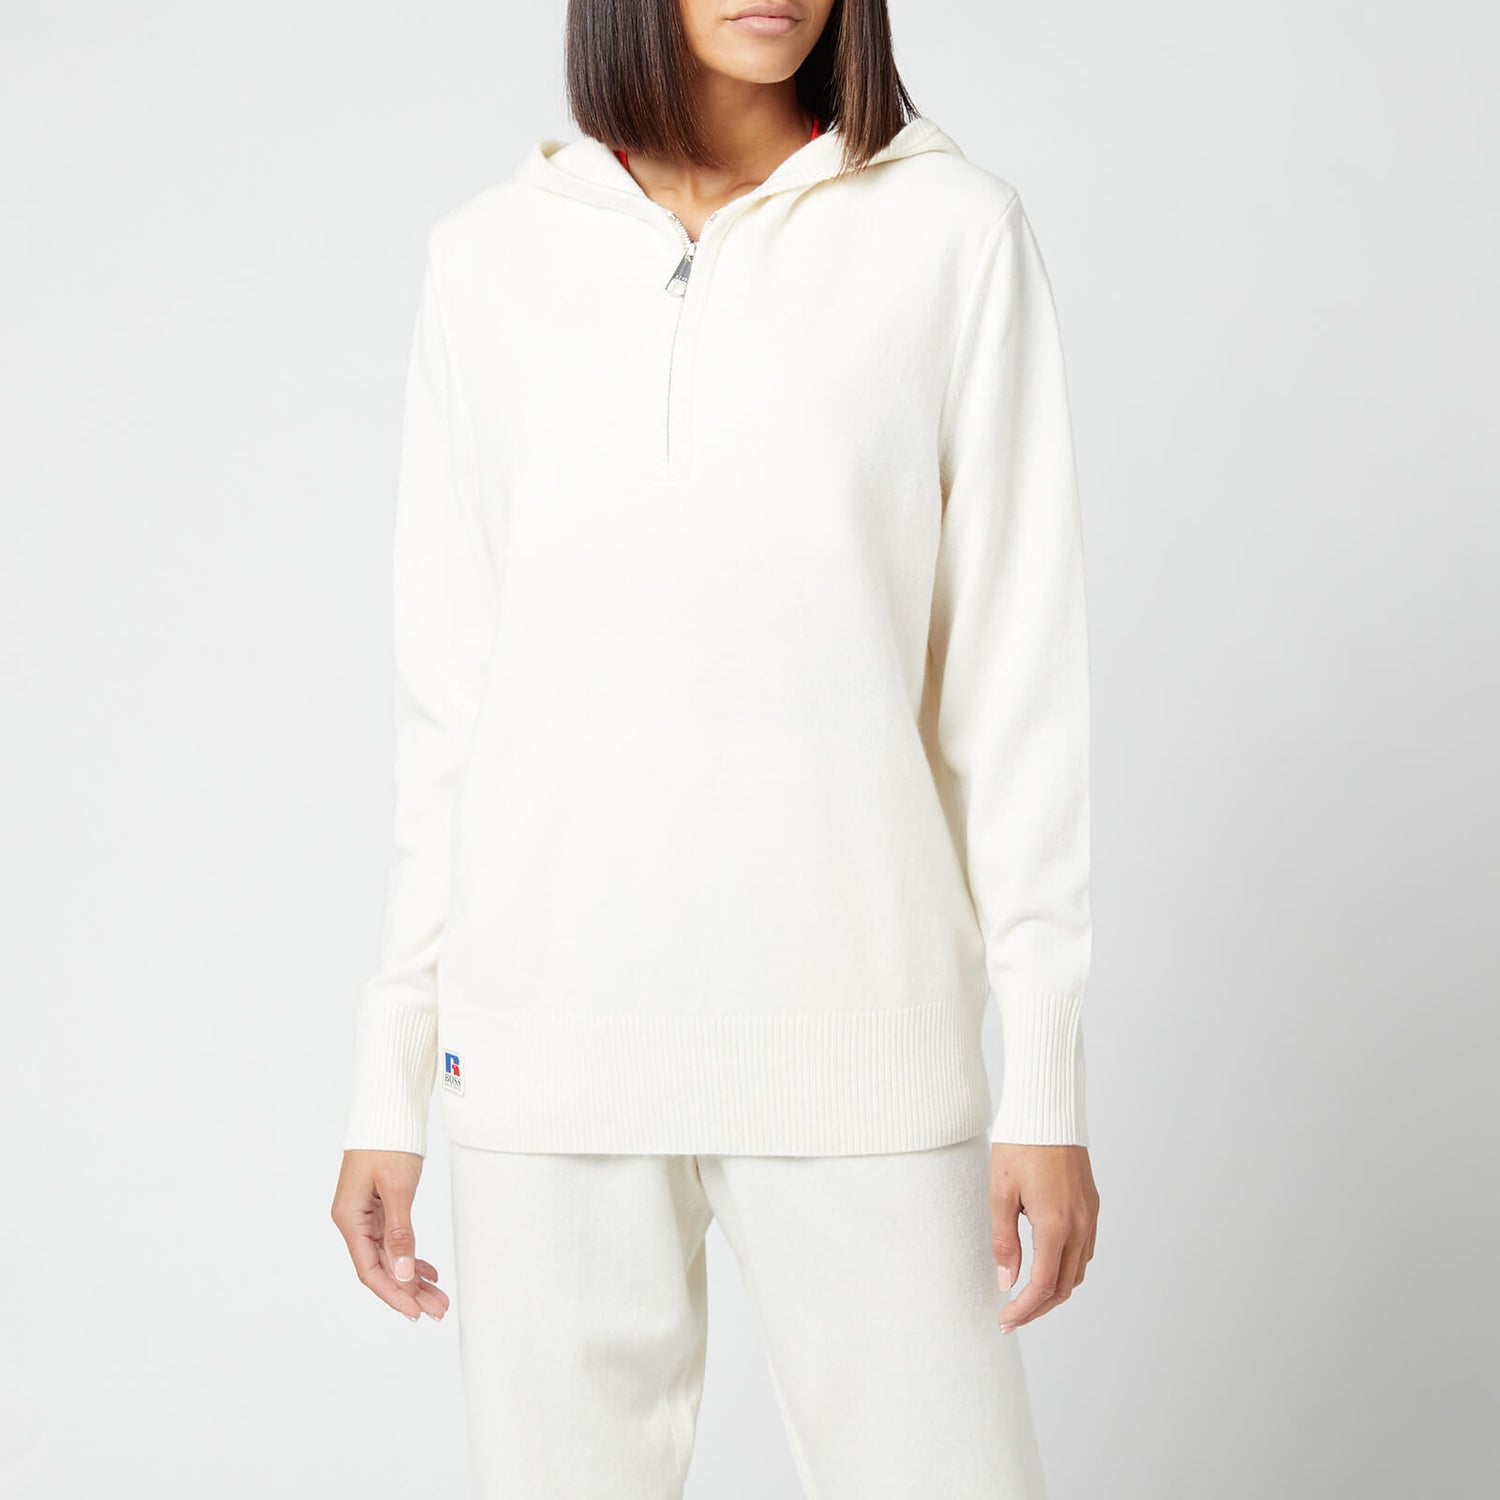 BOSS X Russell Athletic Women's Febrena Hoodie - Open White - S